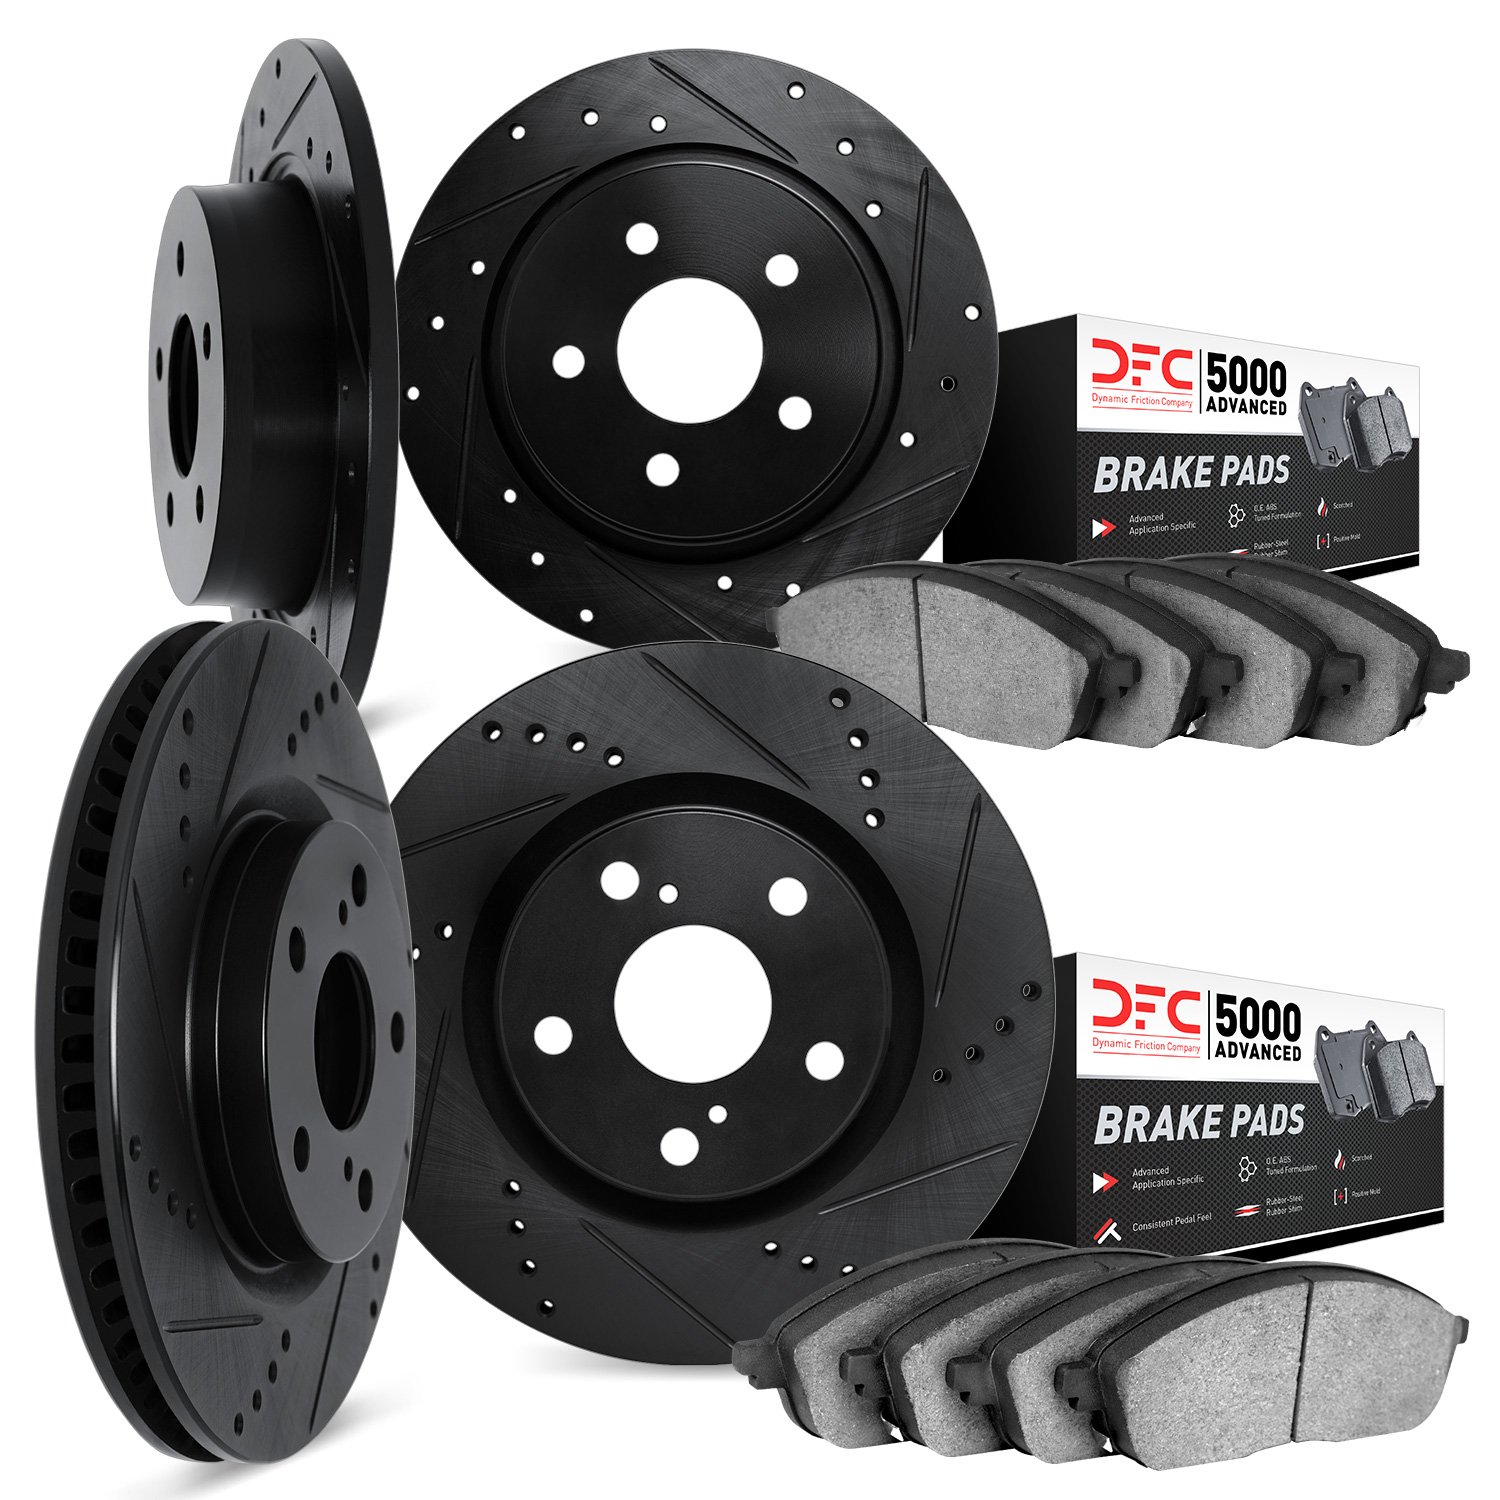 8504-63024 Drilled/Slotted Brake Rotors w/5000 Advanced Brake Pads Kit [Black], 1998-2005 Mercedes-Benz, Position: Front and Rea